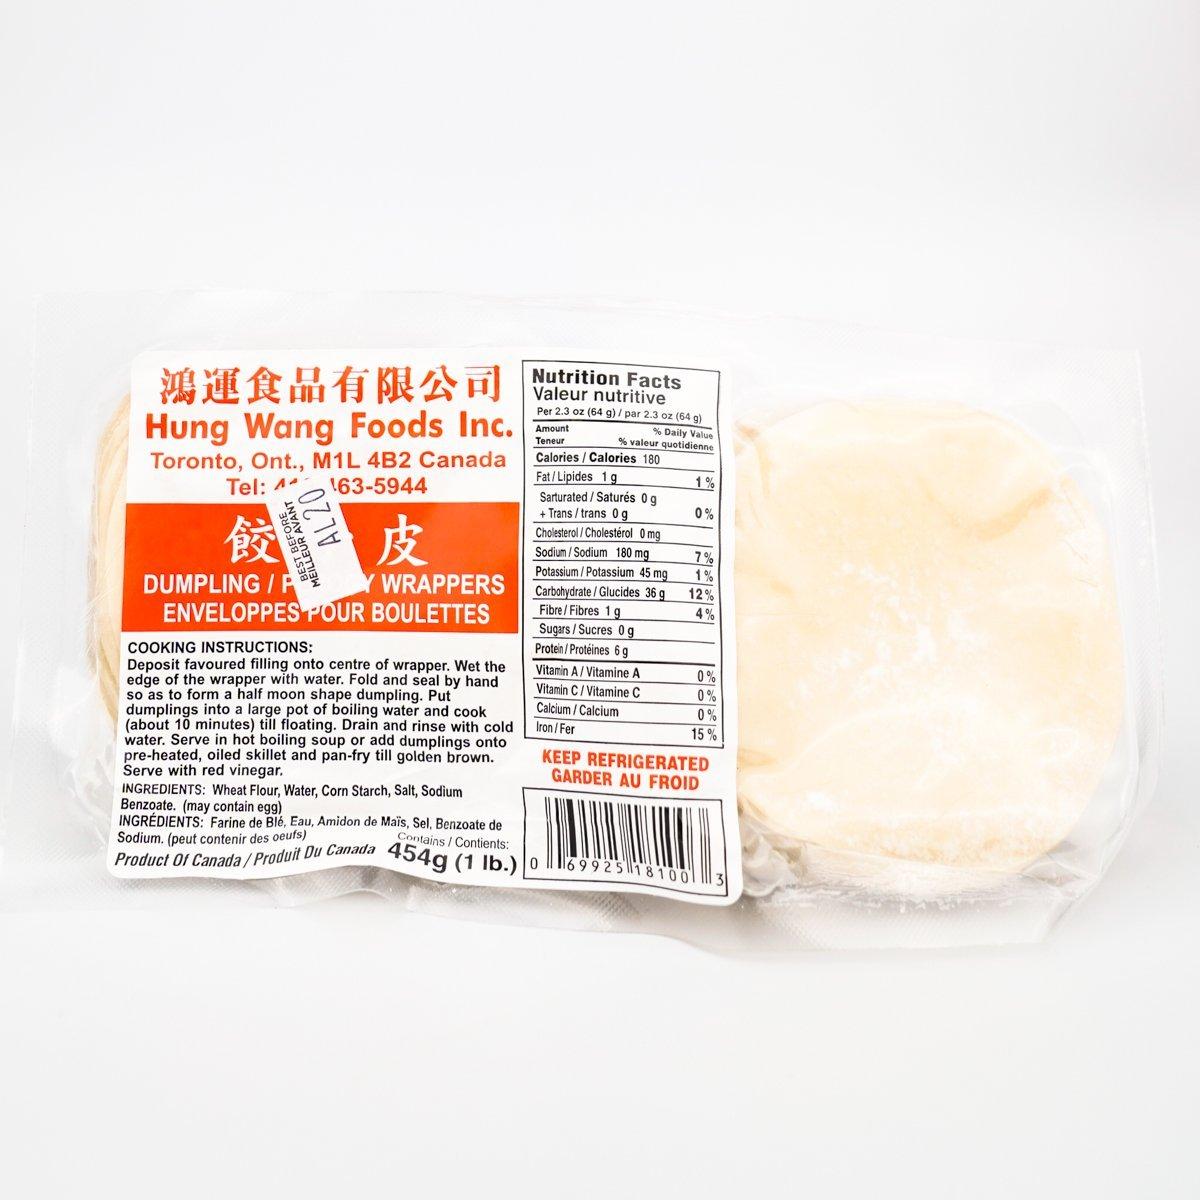 hung-wang-dumpling-wrappers-refrigerated